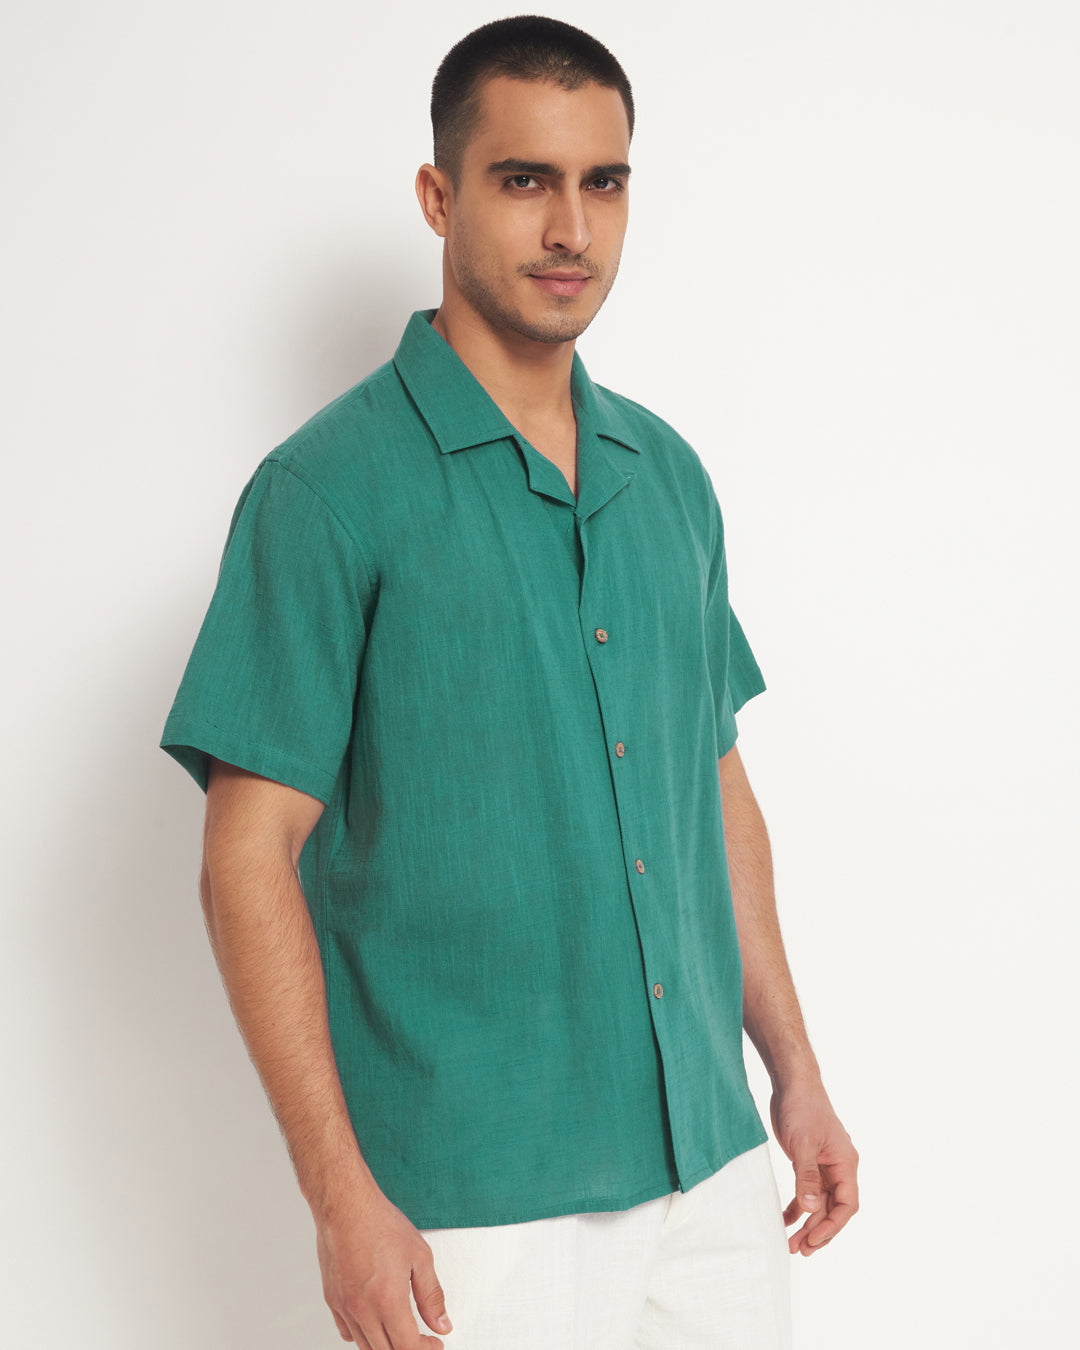 Combo: Classic Forest Green Half Sleeves Men's Shirt & Pants